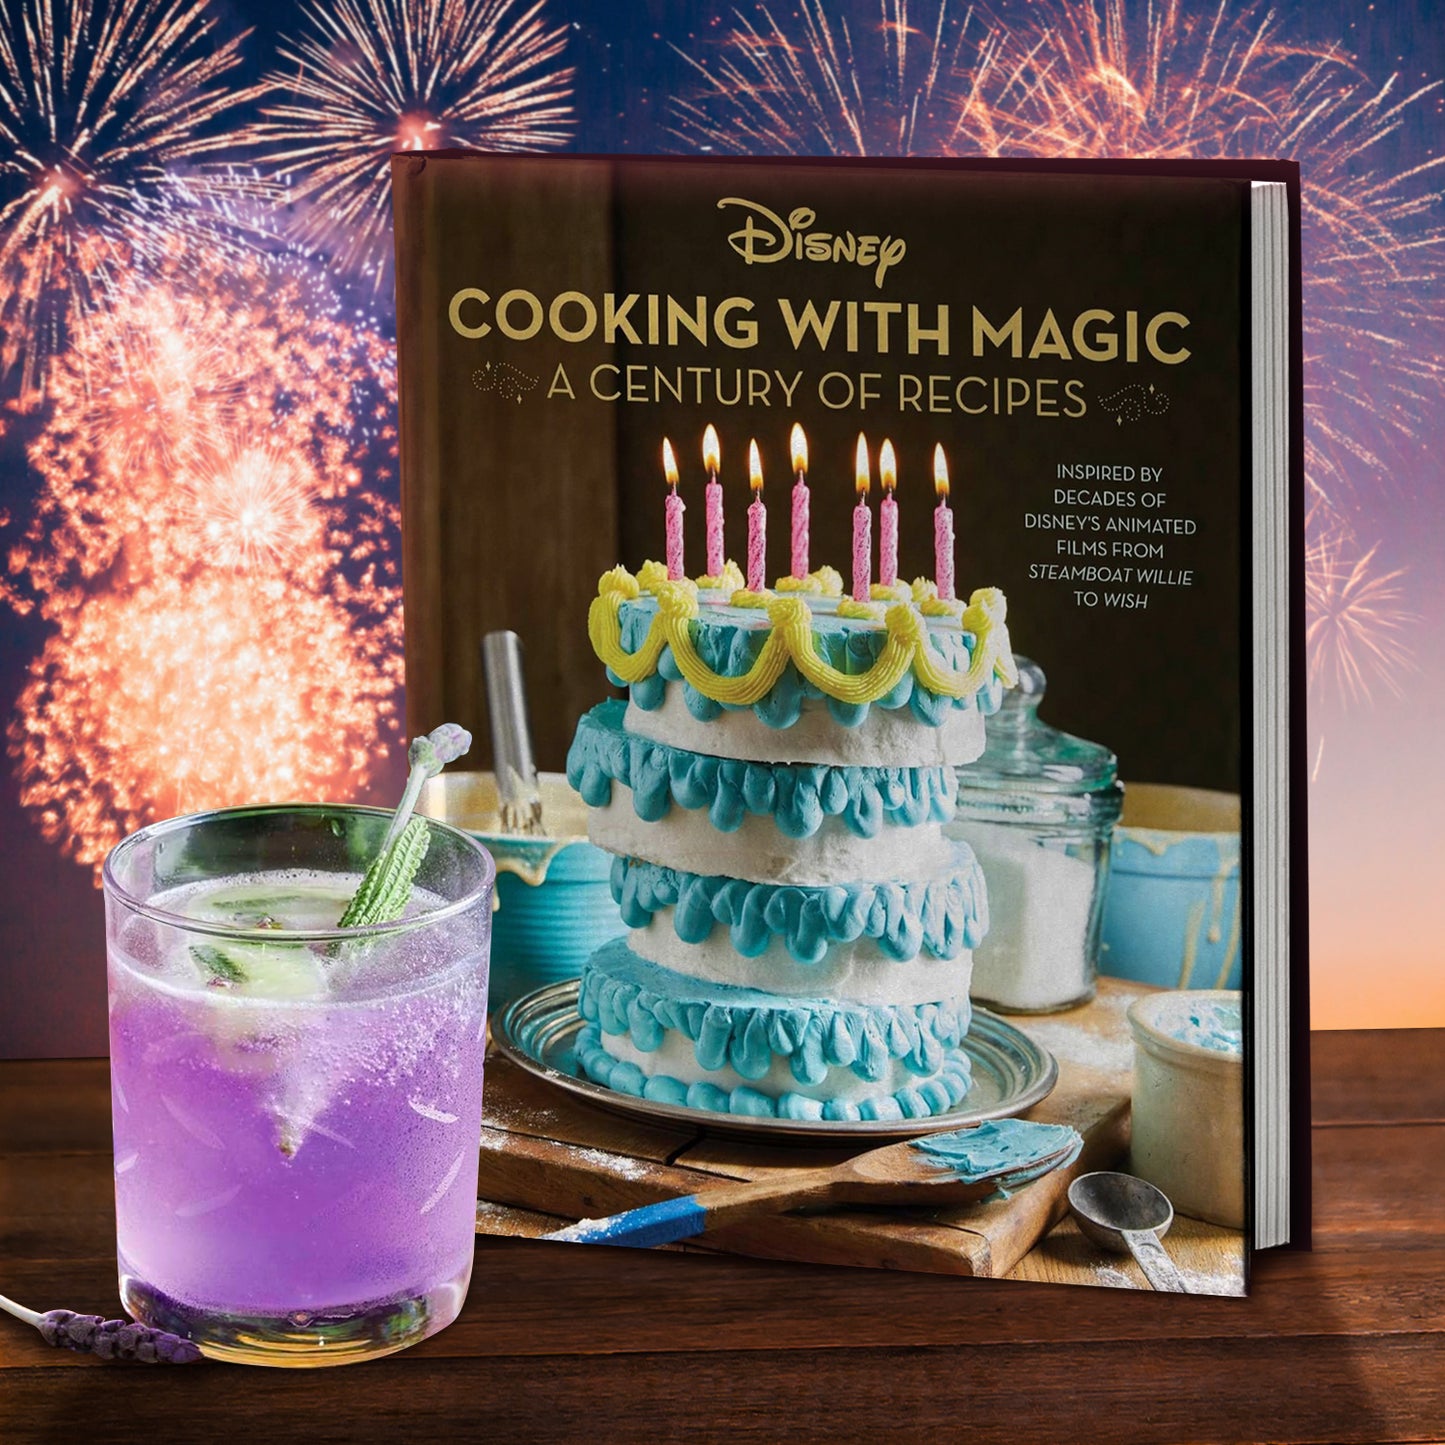 A brown cookbook cover with the Disney logo and the text: "COOKING WITH MAGIC: A CENTURY OF RECIPES" and "Inspired by decades of Disney's animated films from STEAMBOAT WILLIE to WISH". There is a blue, yellow, and white cake on the front with pink candles. The book is on a wooden table in front of fireworks, and there is a mixed drink sitting in front of it. 